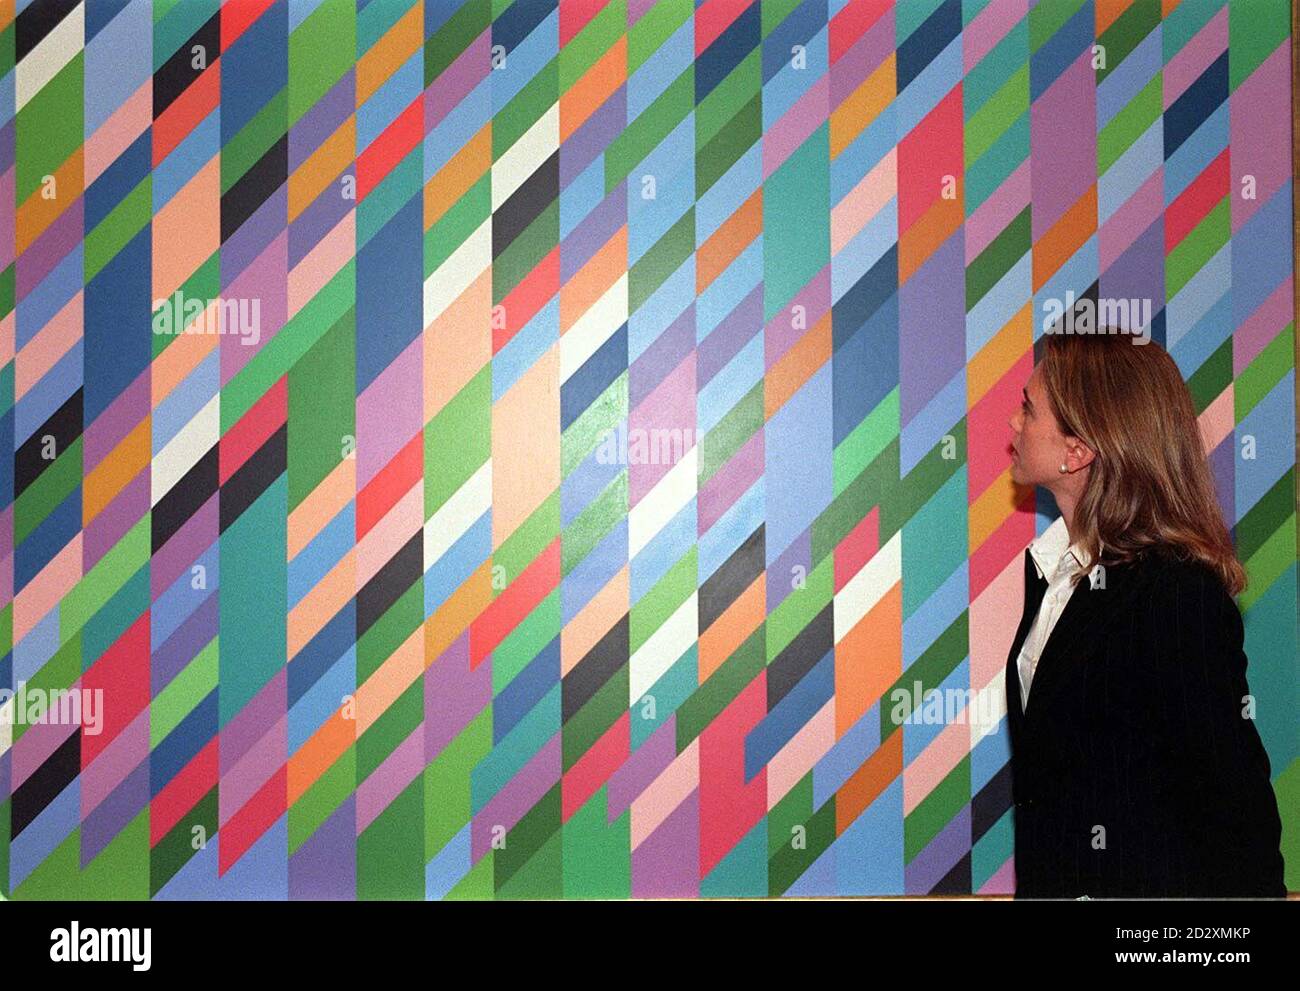 Monica Campos, a specialist of Christies' contemporary art department, admires work by English artist Bridget Riley entitled 'Certain Day', in London today (Weds), previewing the Contemporary Art Sale of 20th Century pictures, drawings and sculpture from rock legend Eric Clapton's collection, which hopes to fetch 30,000- 40,000, at the auction with the entire collection estimated at 300,000- 500,000, on May 29. Photo by Helen Tilley. * 2/7/03: An art expert admiring work by English artist Bridget Riley entitled 'Certain Day' as Riley and influential film-maker Ken Loach were among five Stock Photo